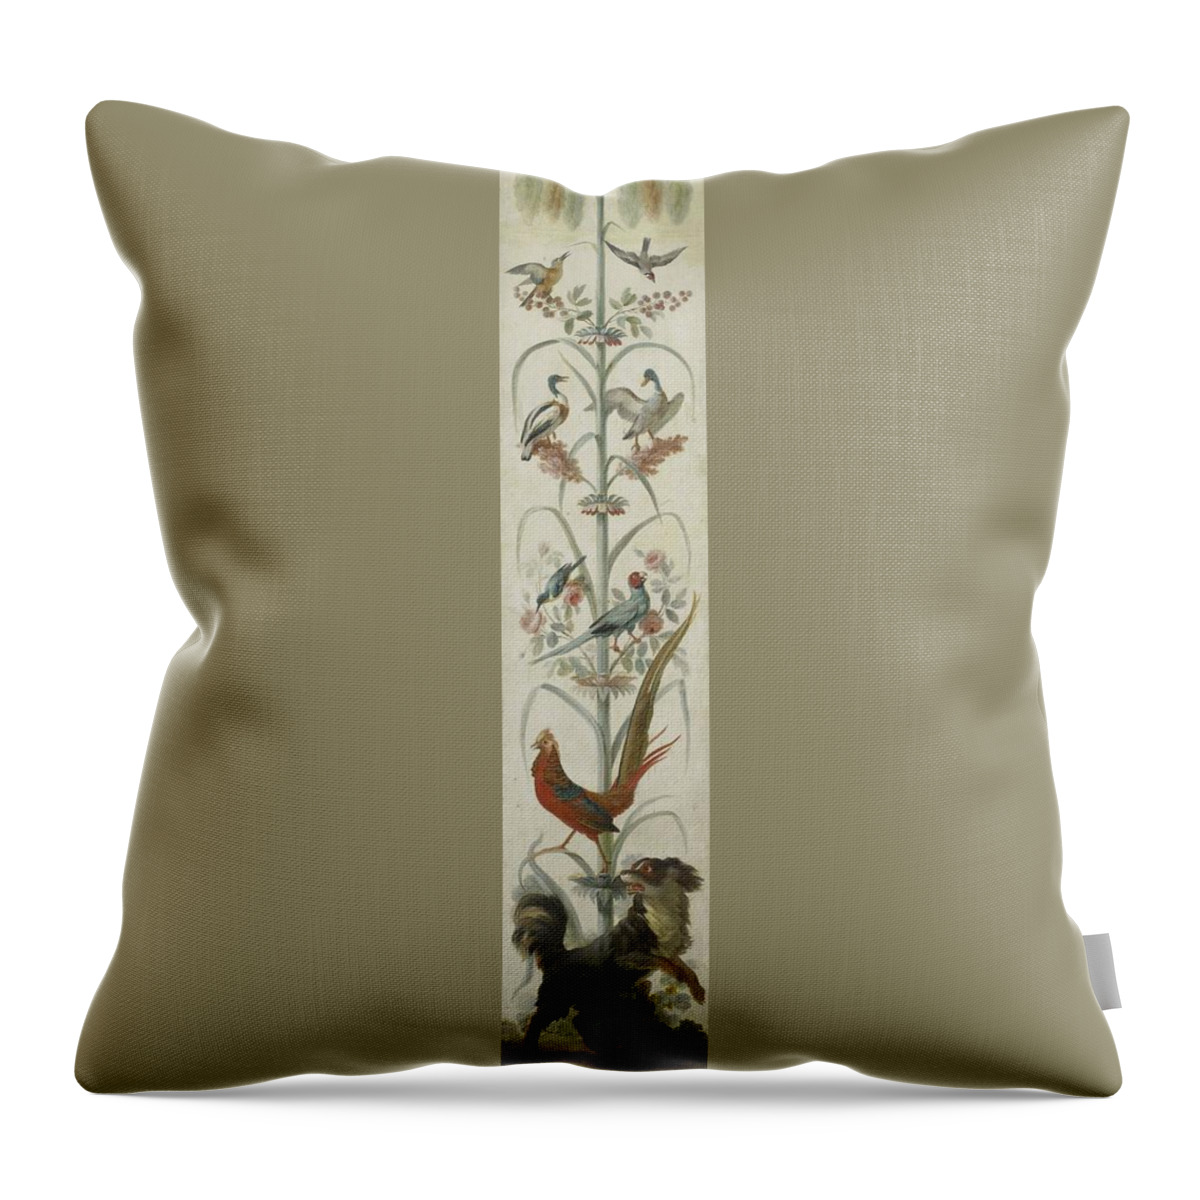 Decorative Depiction With Plants And Animals Throw Pillow featuring the painting Decorative Depiction with Plants and Animals by MotionAge Designs